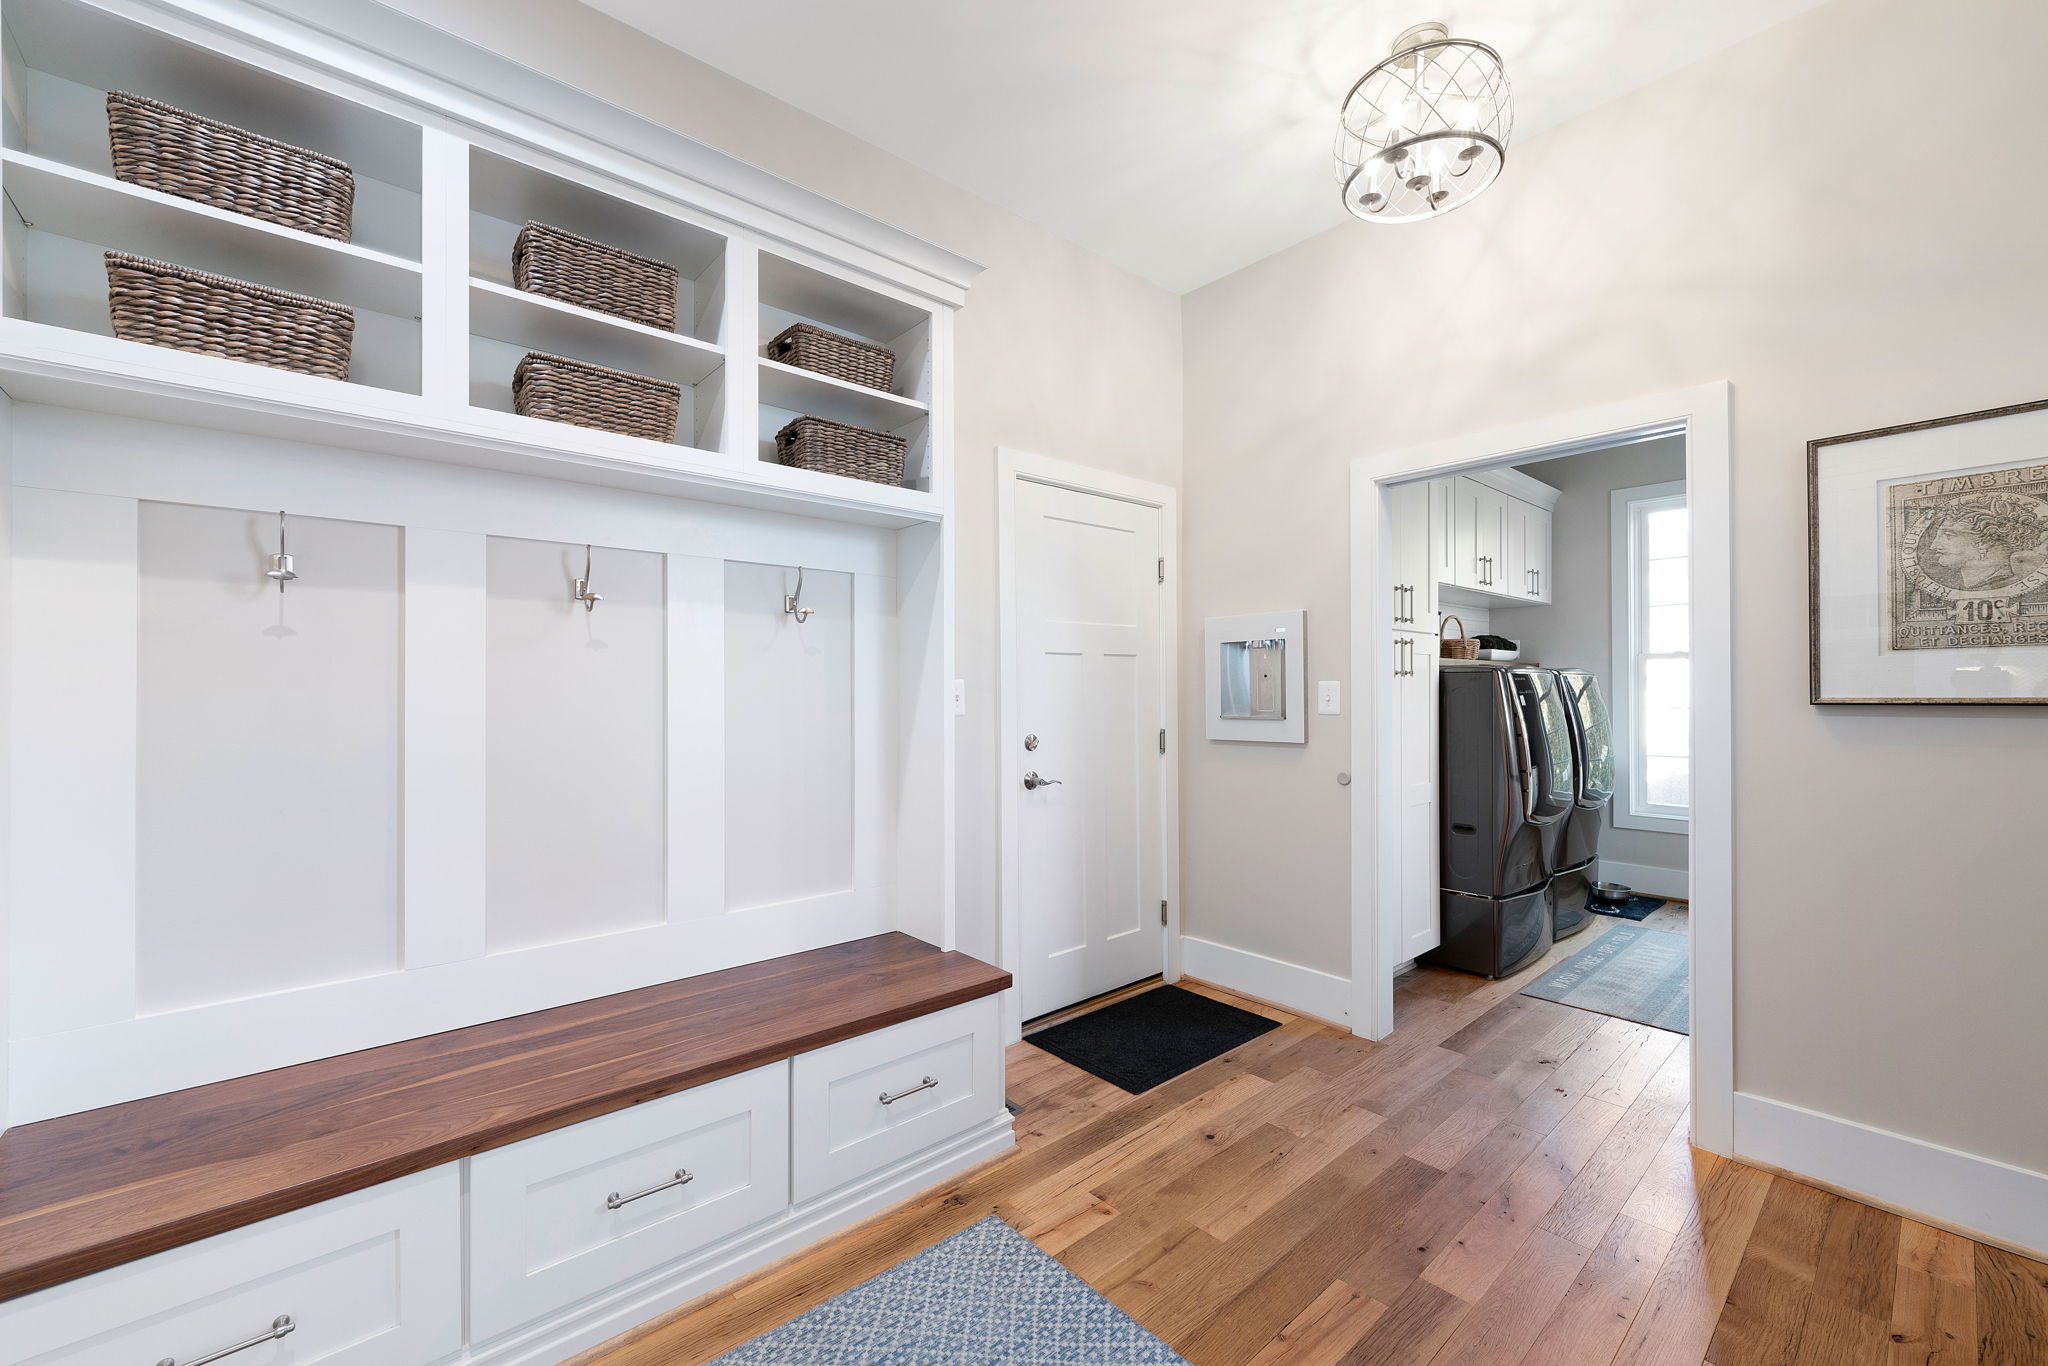 The mud room has been redesigned for a sleek, organized storage area